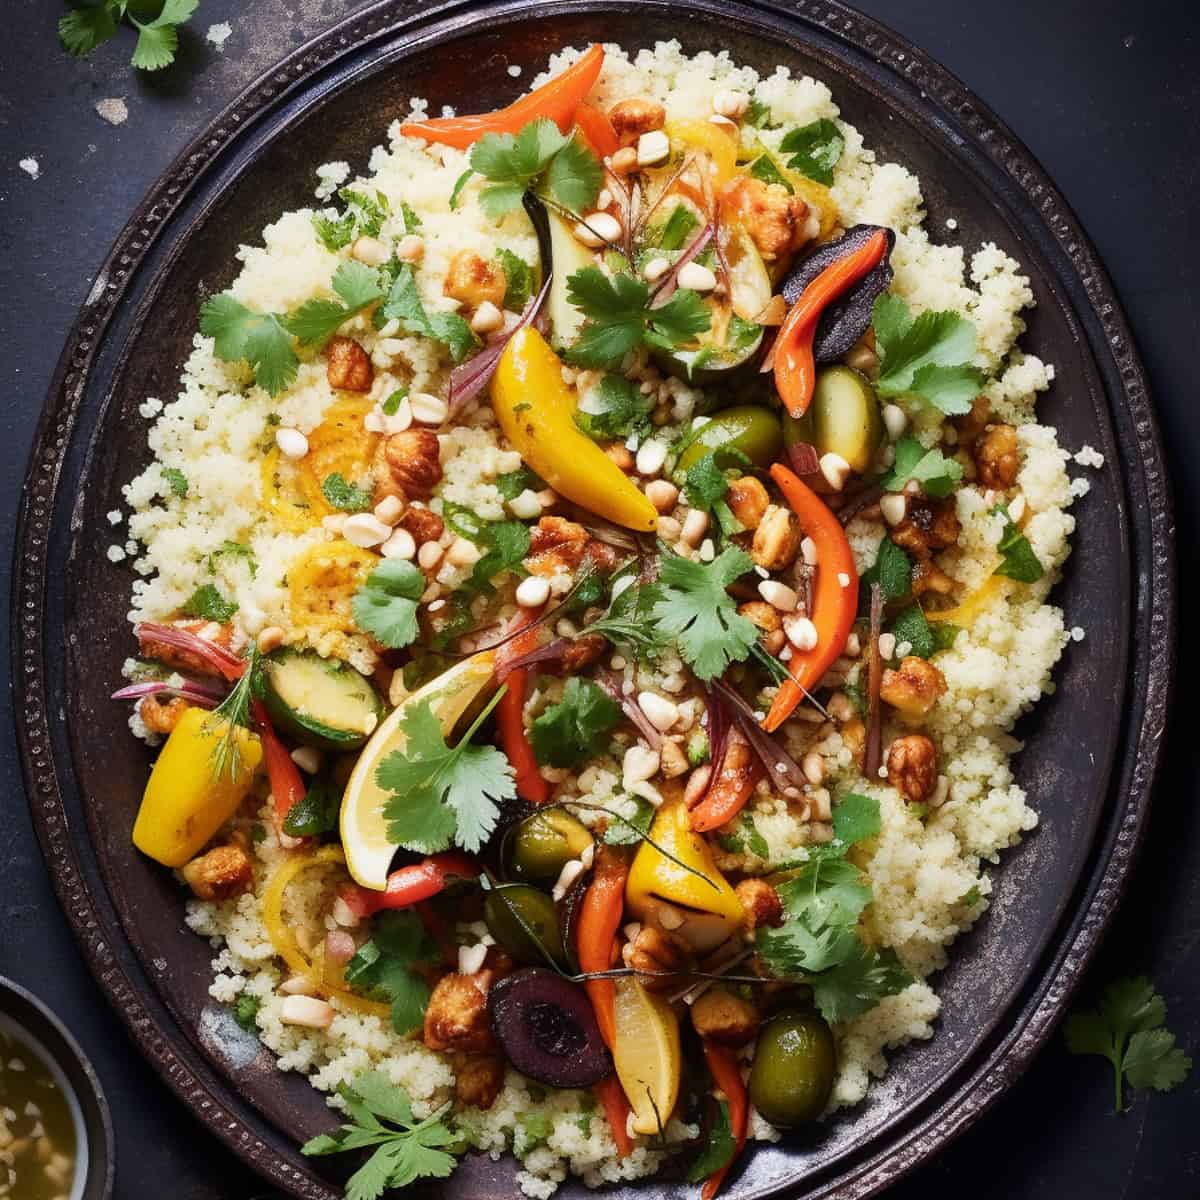 Moroccan couscous with roasted vegetables and herbs.